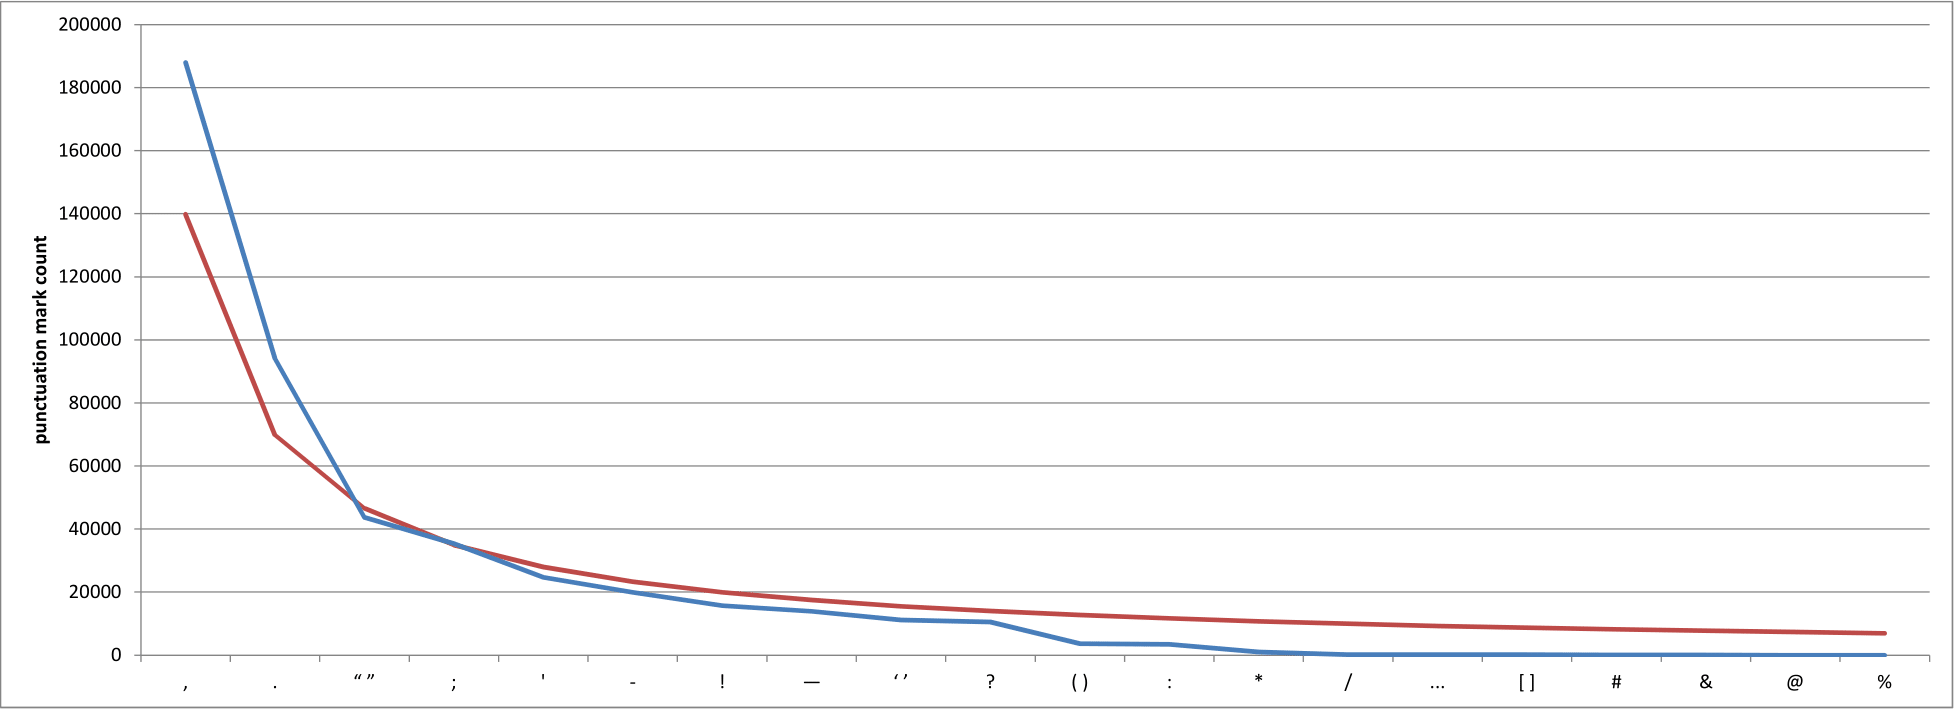 Punctuation mark counts (blue) in a selection of works from Project Gutenberg, ordered from most to least common. Also shown are the projected counts (green). (Image by the author.)